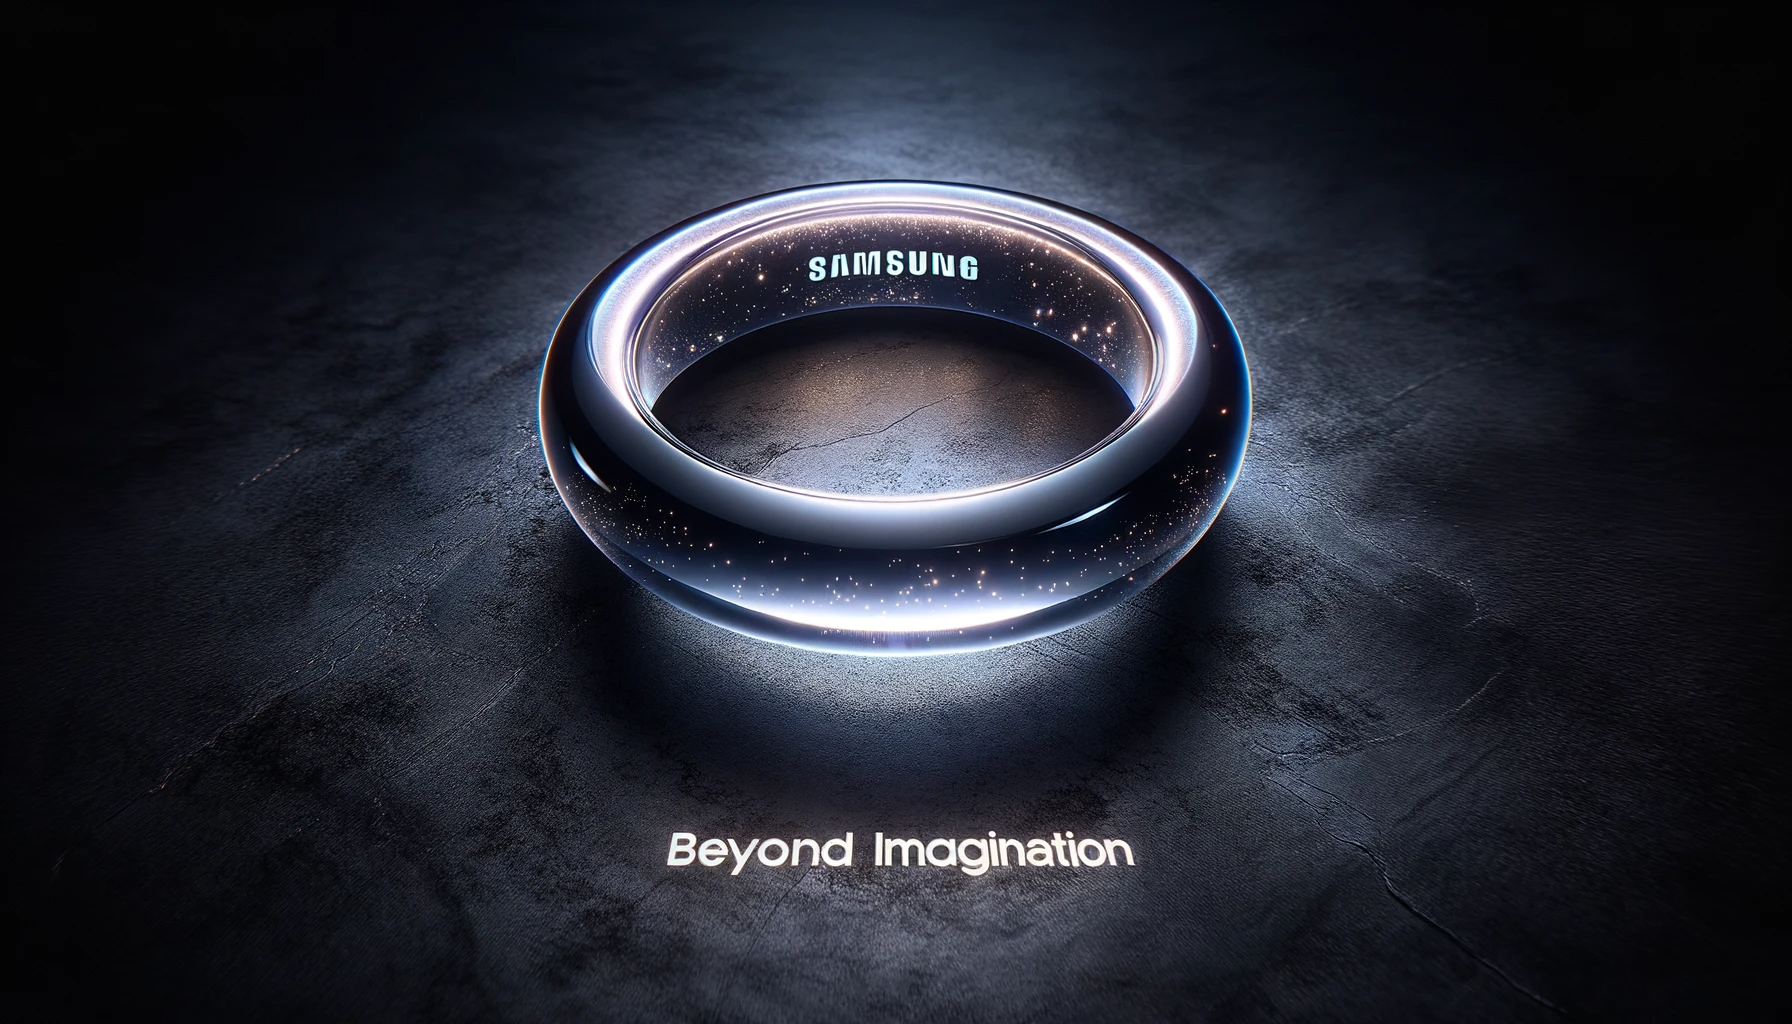 8K photo-realistic image of the 'Samsung Galaxy Ring' captured using the 'Sigma 24mm f_8' lens. The ring sits on a graphite textured surface